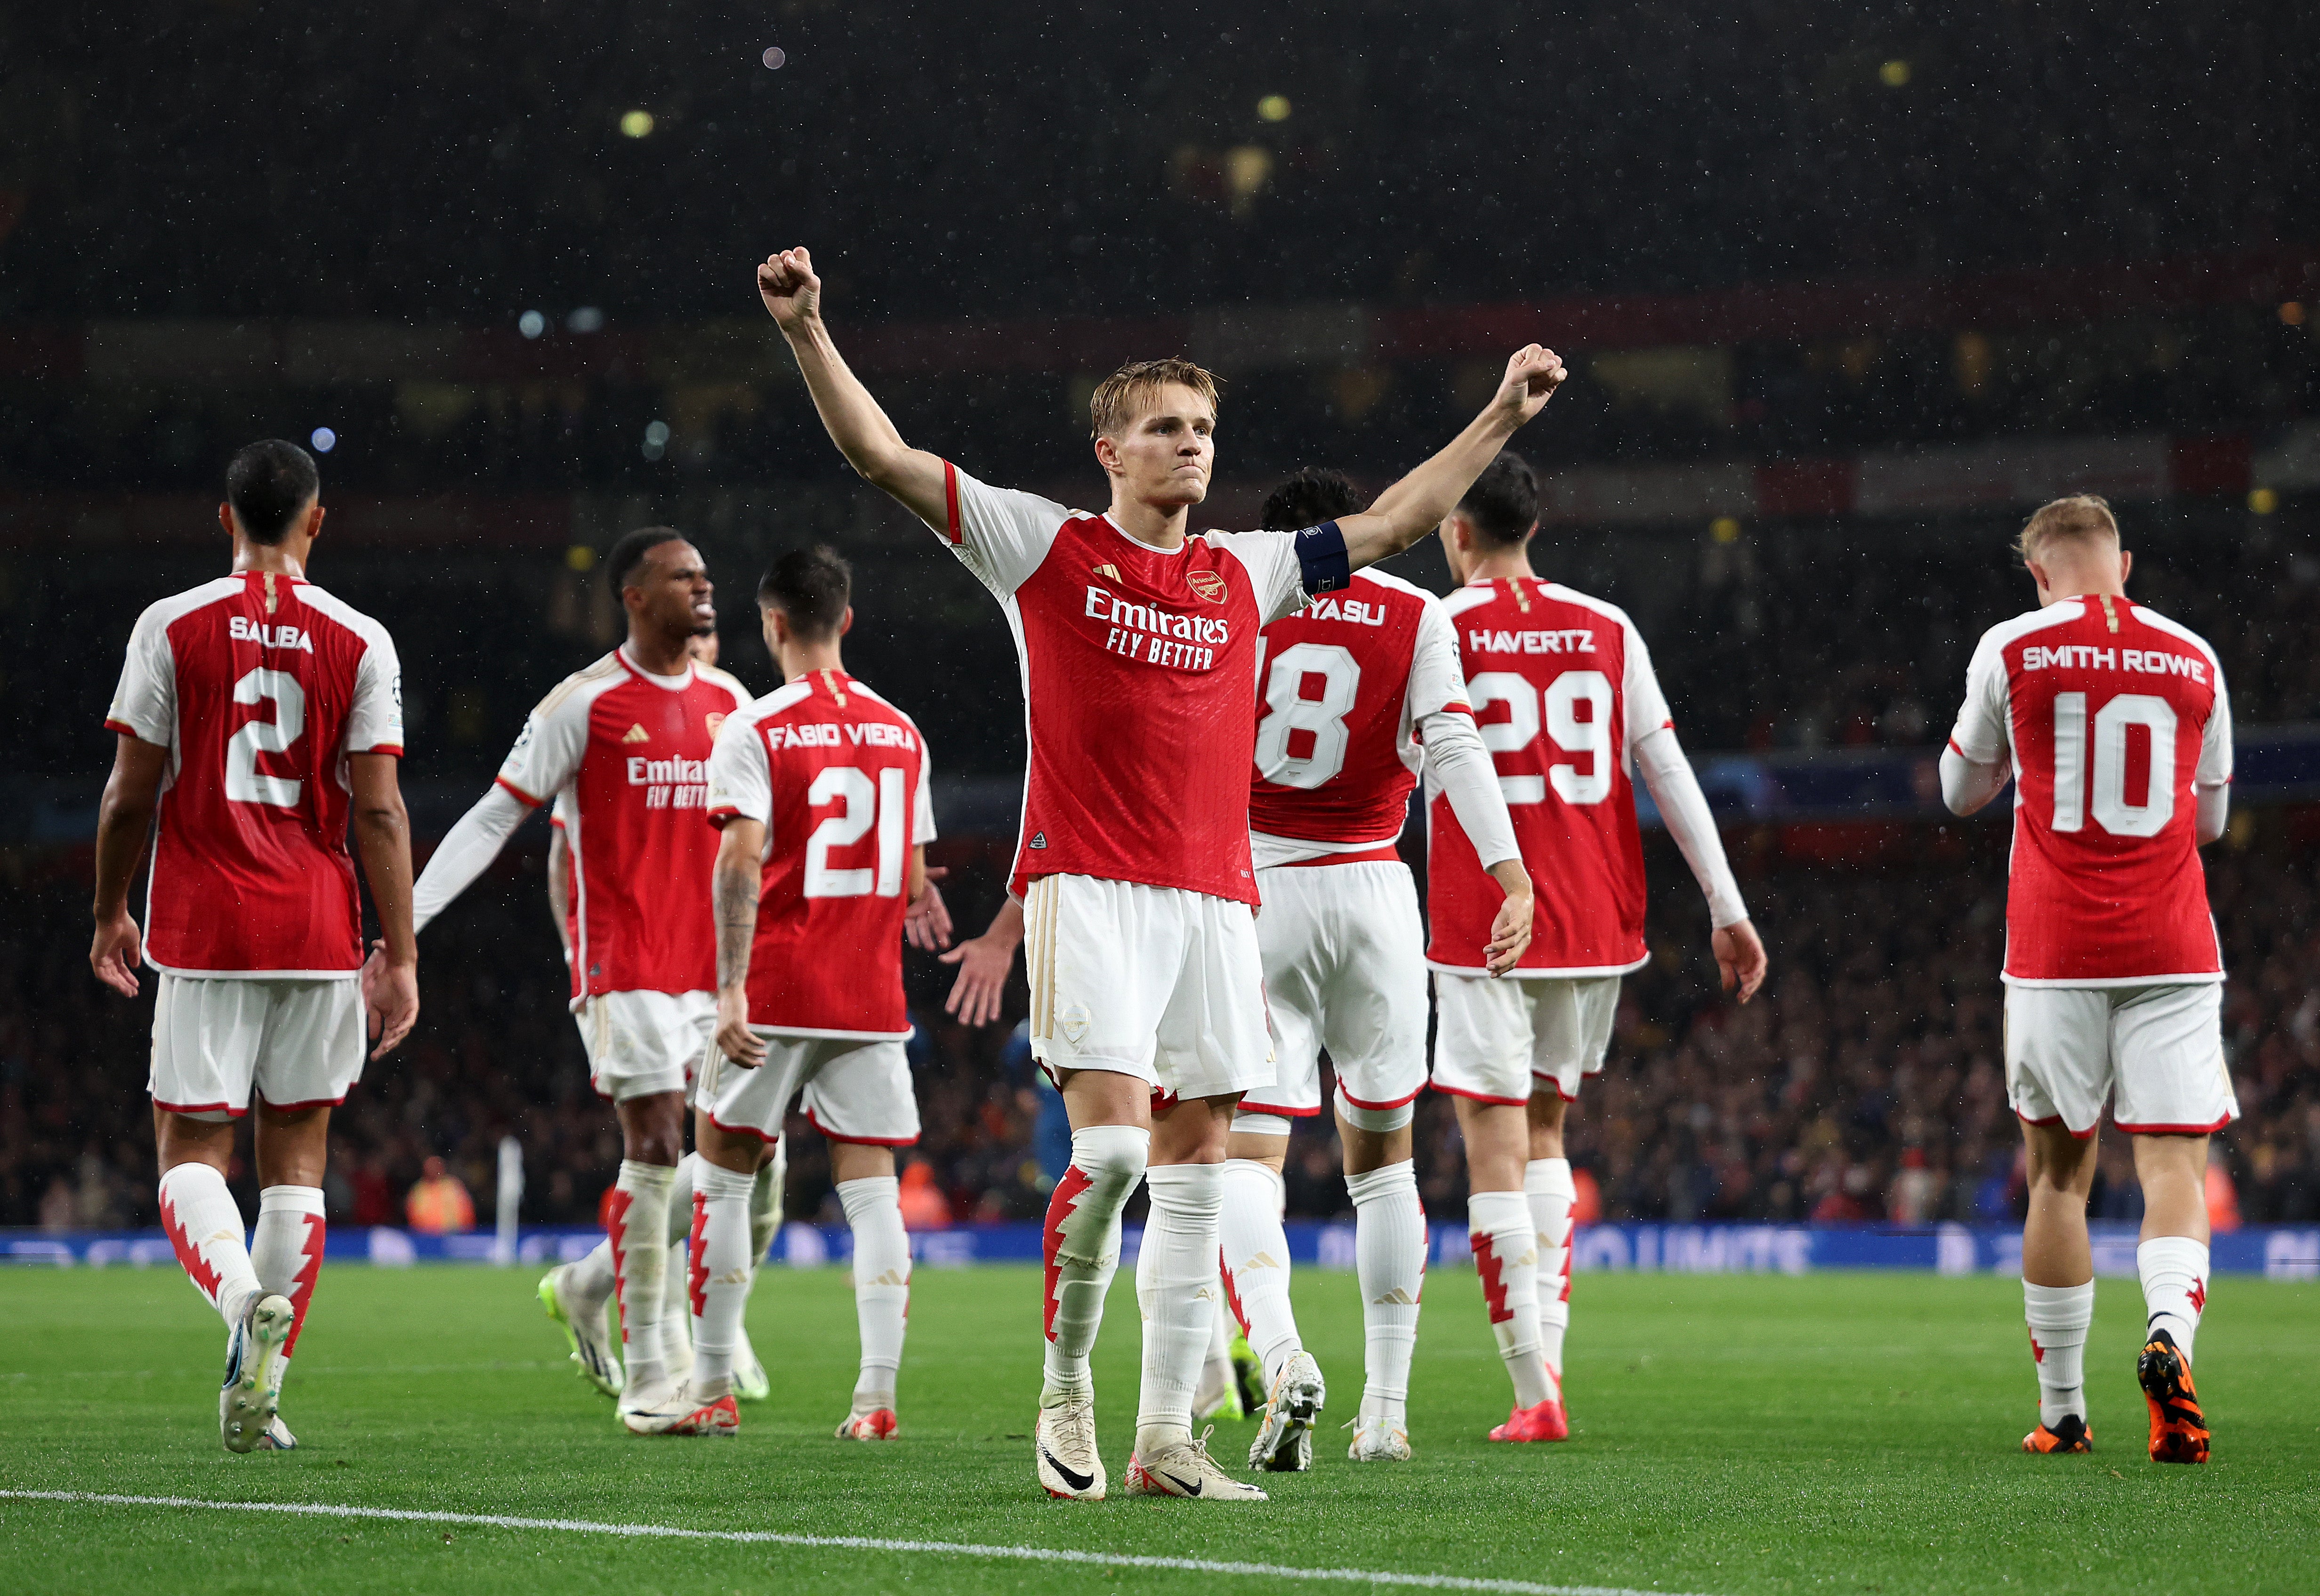 Arsenal return to Champions League action as they take on Lens